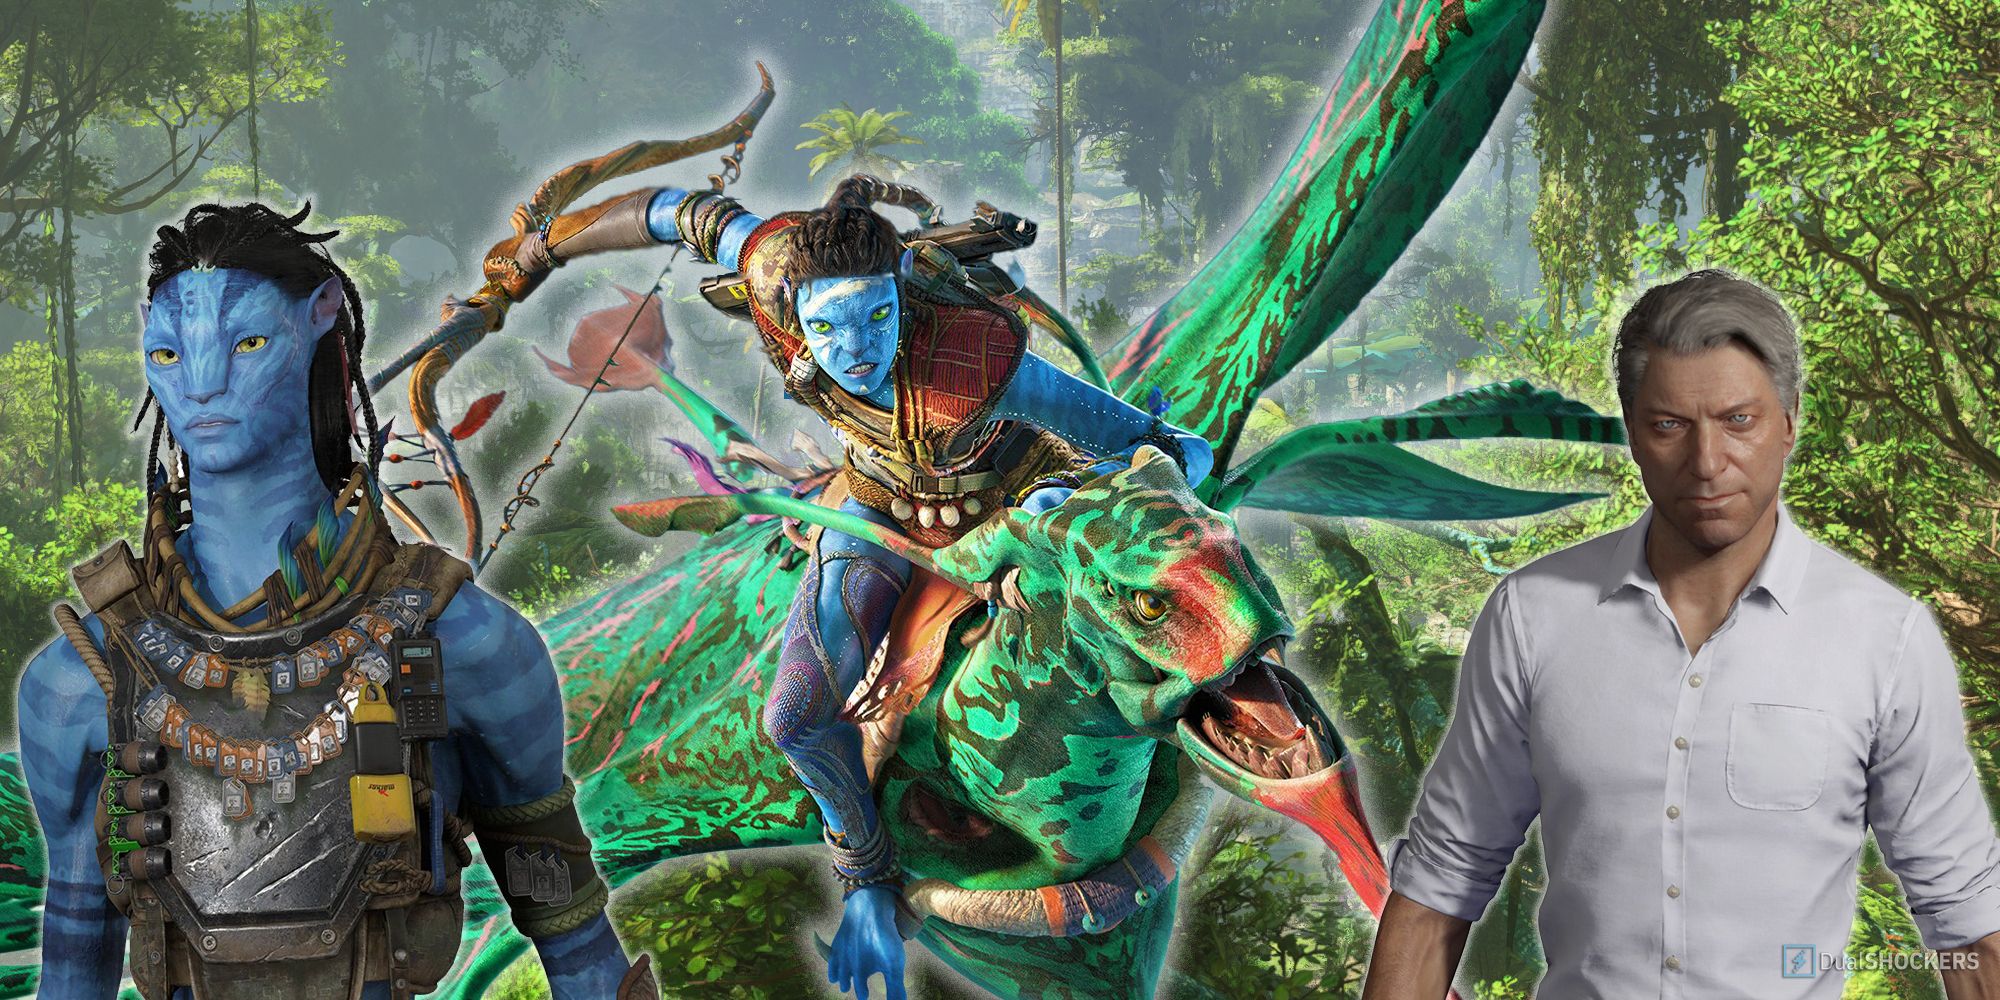 Avatar: Frontiers of Pandora main character riding an Ikran surrounded by John Mercer, the game's antagonist, and So'lek, an ally.